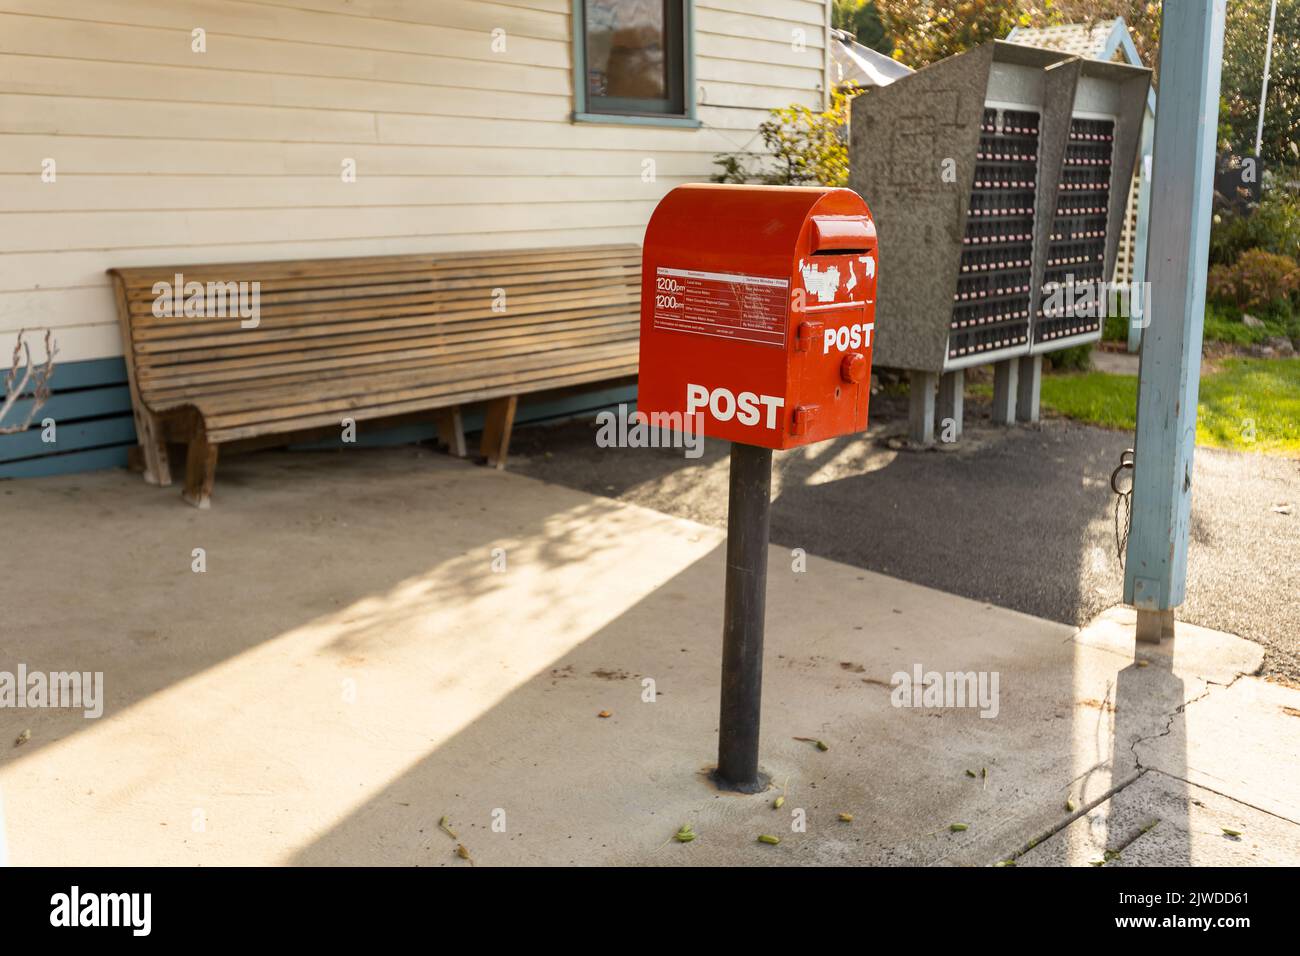 A red australia post letter box stripped of all branding and logos. Stock Photo